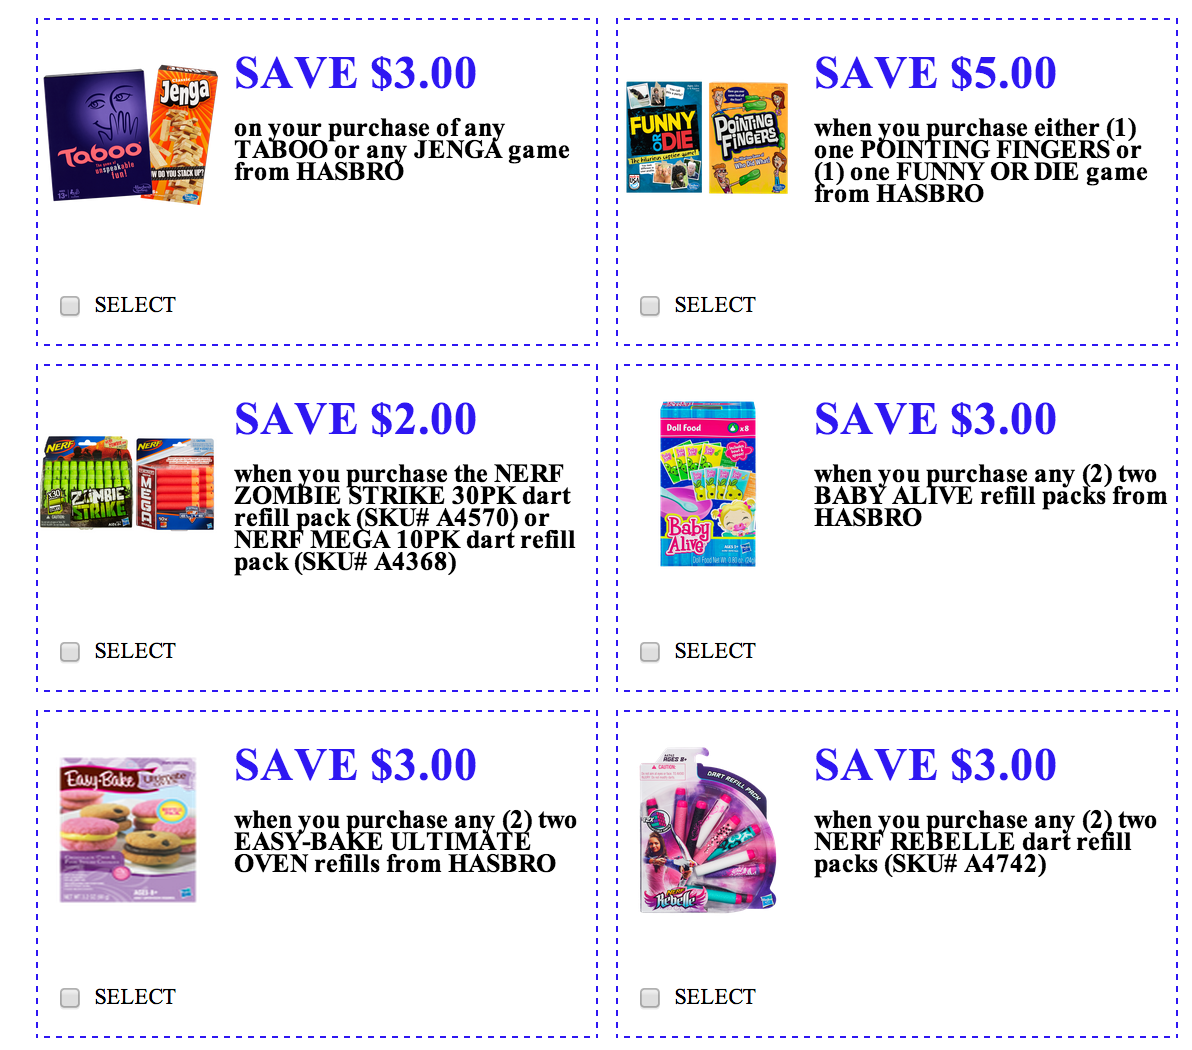 NEW Hasbro Toy/Game Coupons Out to Print! Freebies2Deals